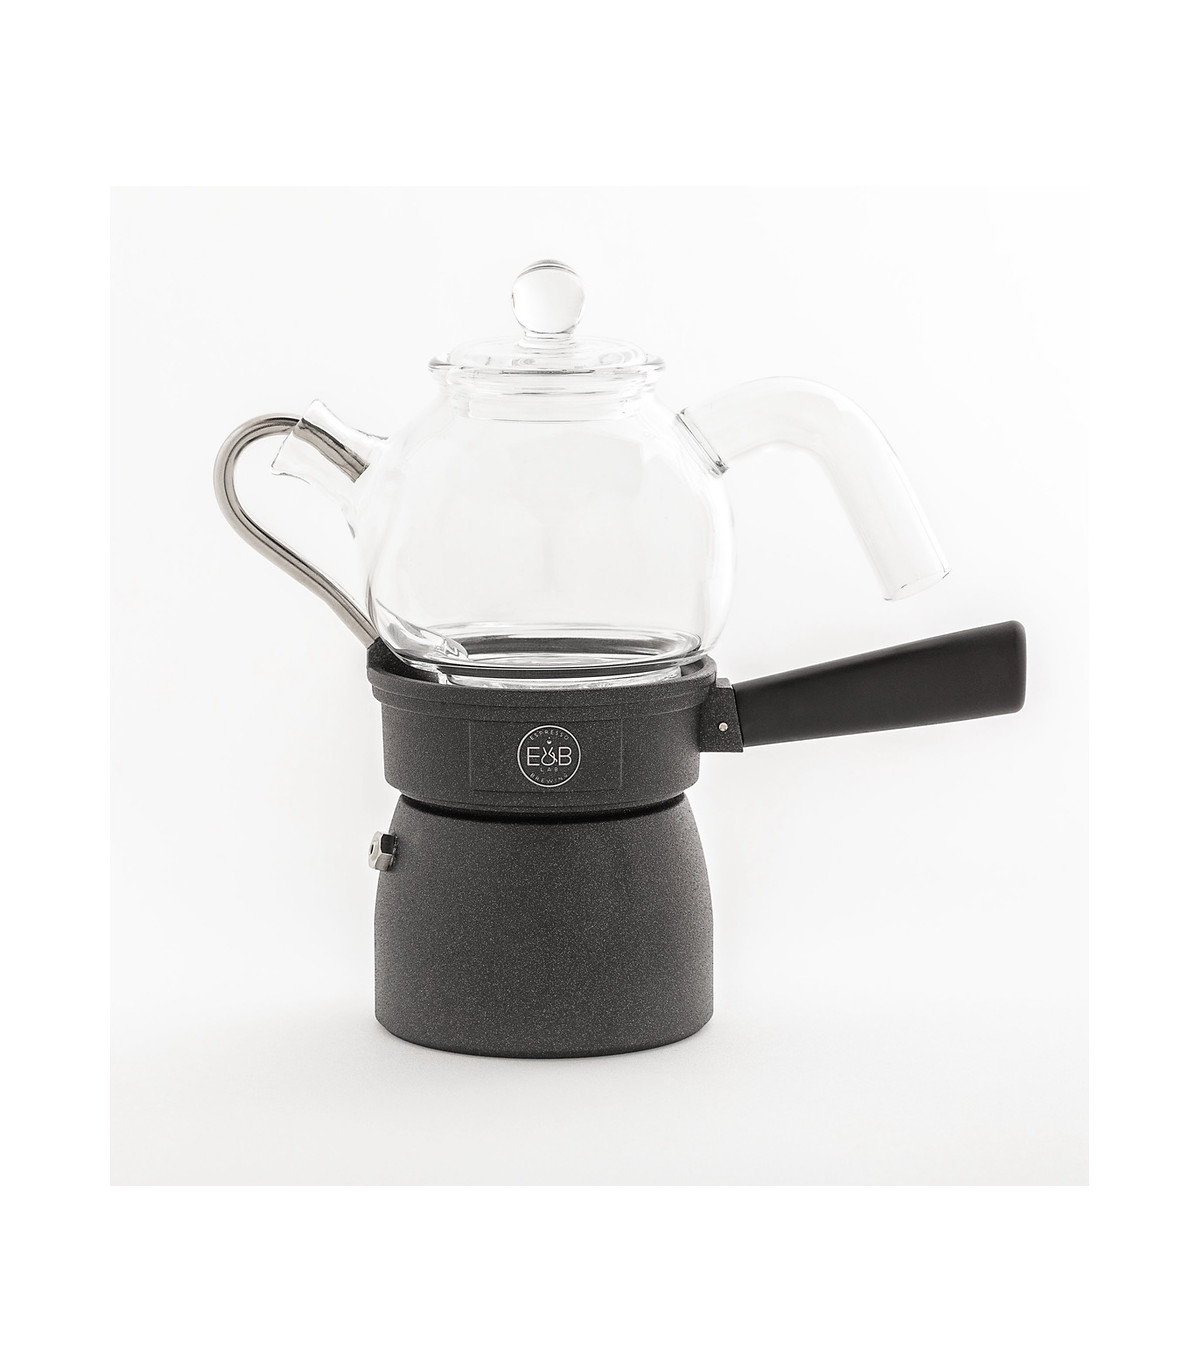 Innovative Moka Induction Coffee Pot - Perfect for Any Stovetop